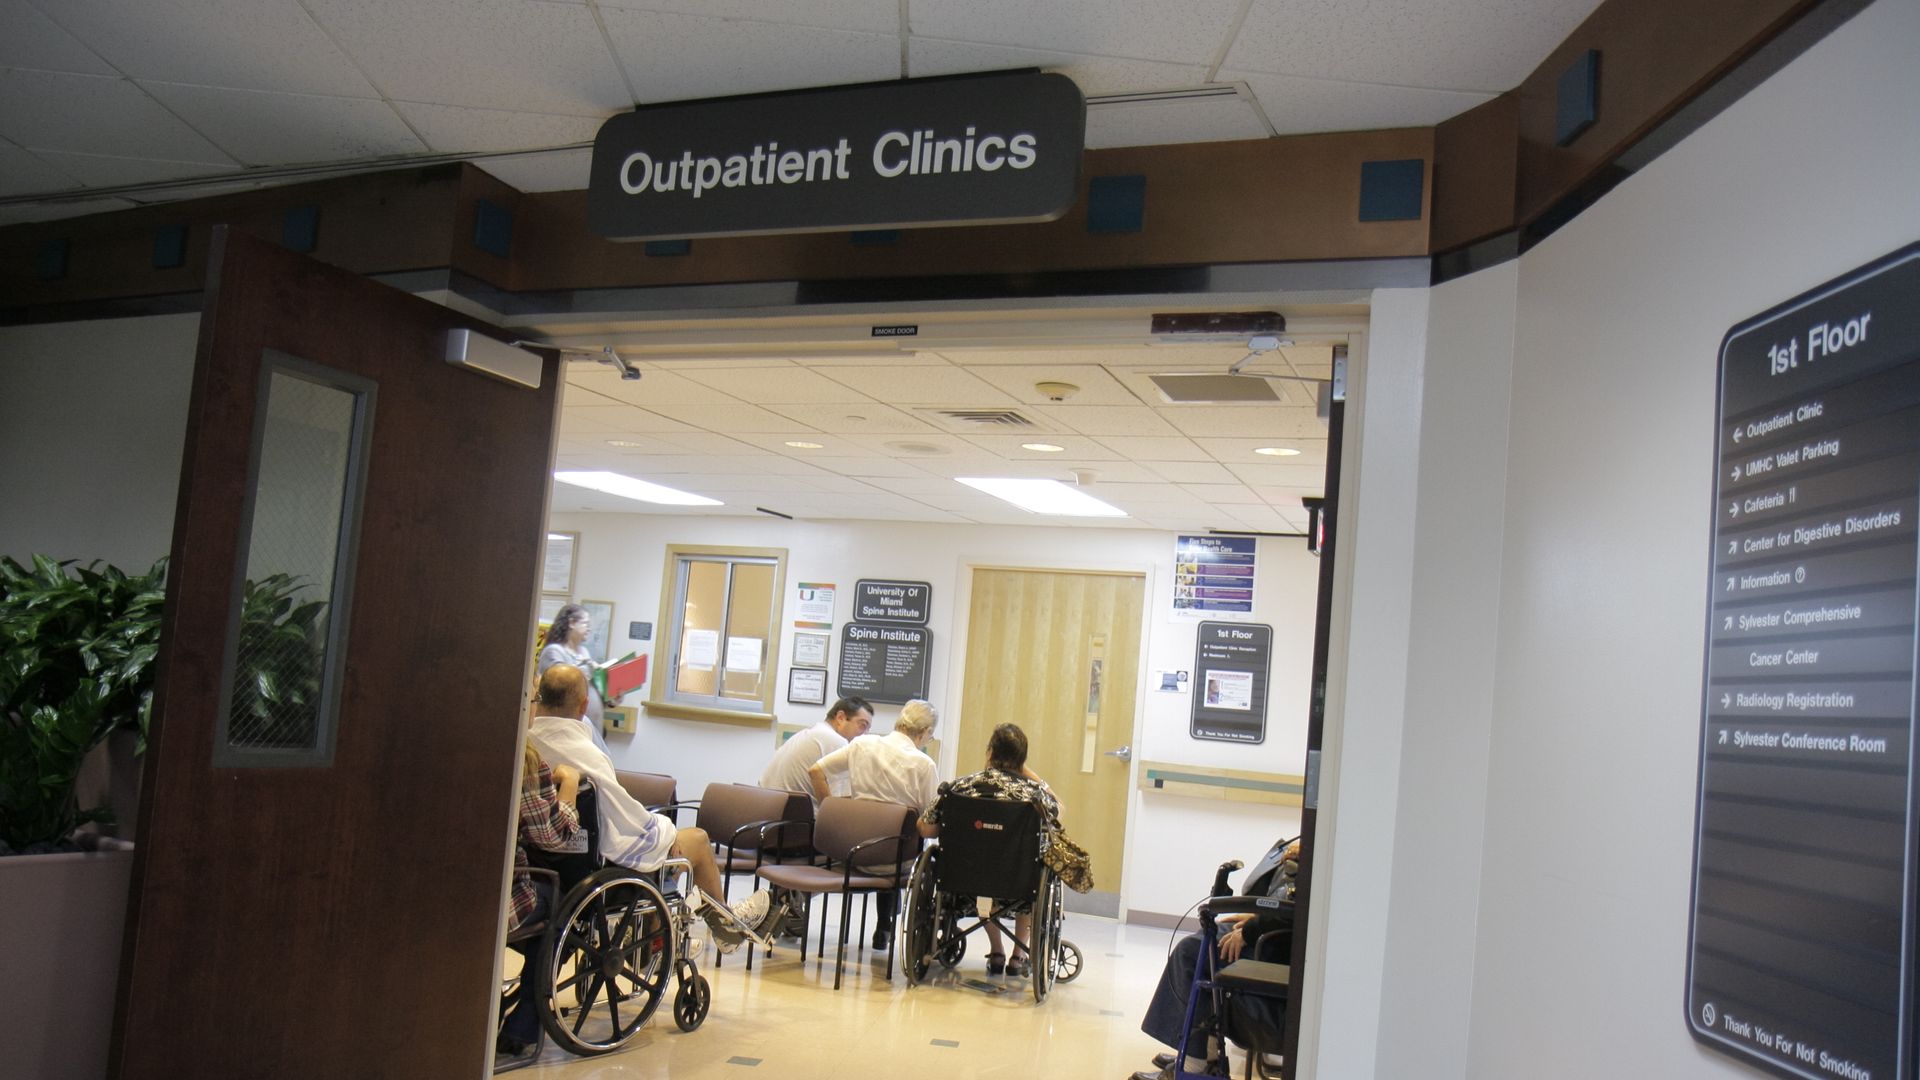 A hospital outpatient clinic where patients are waiting.